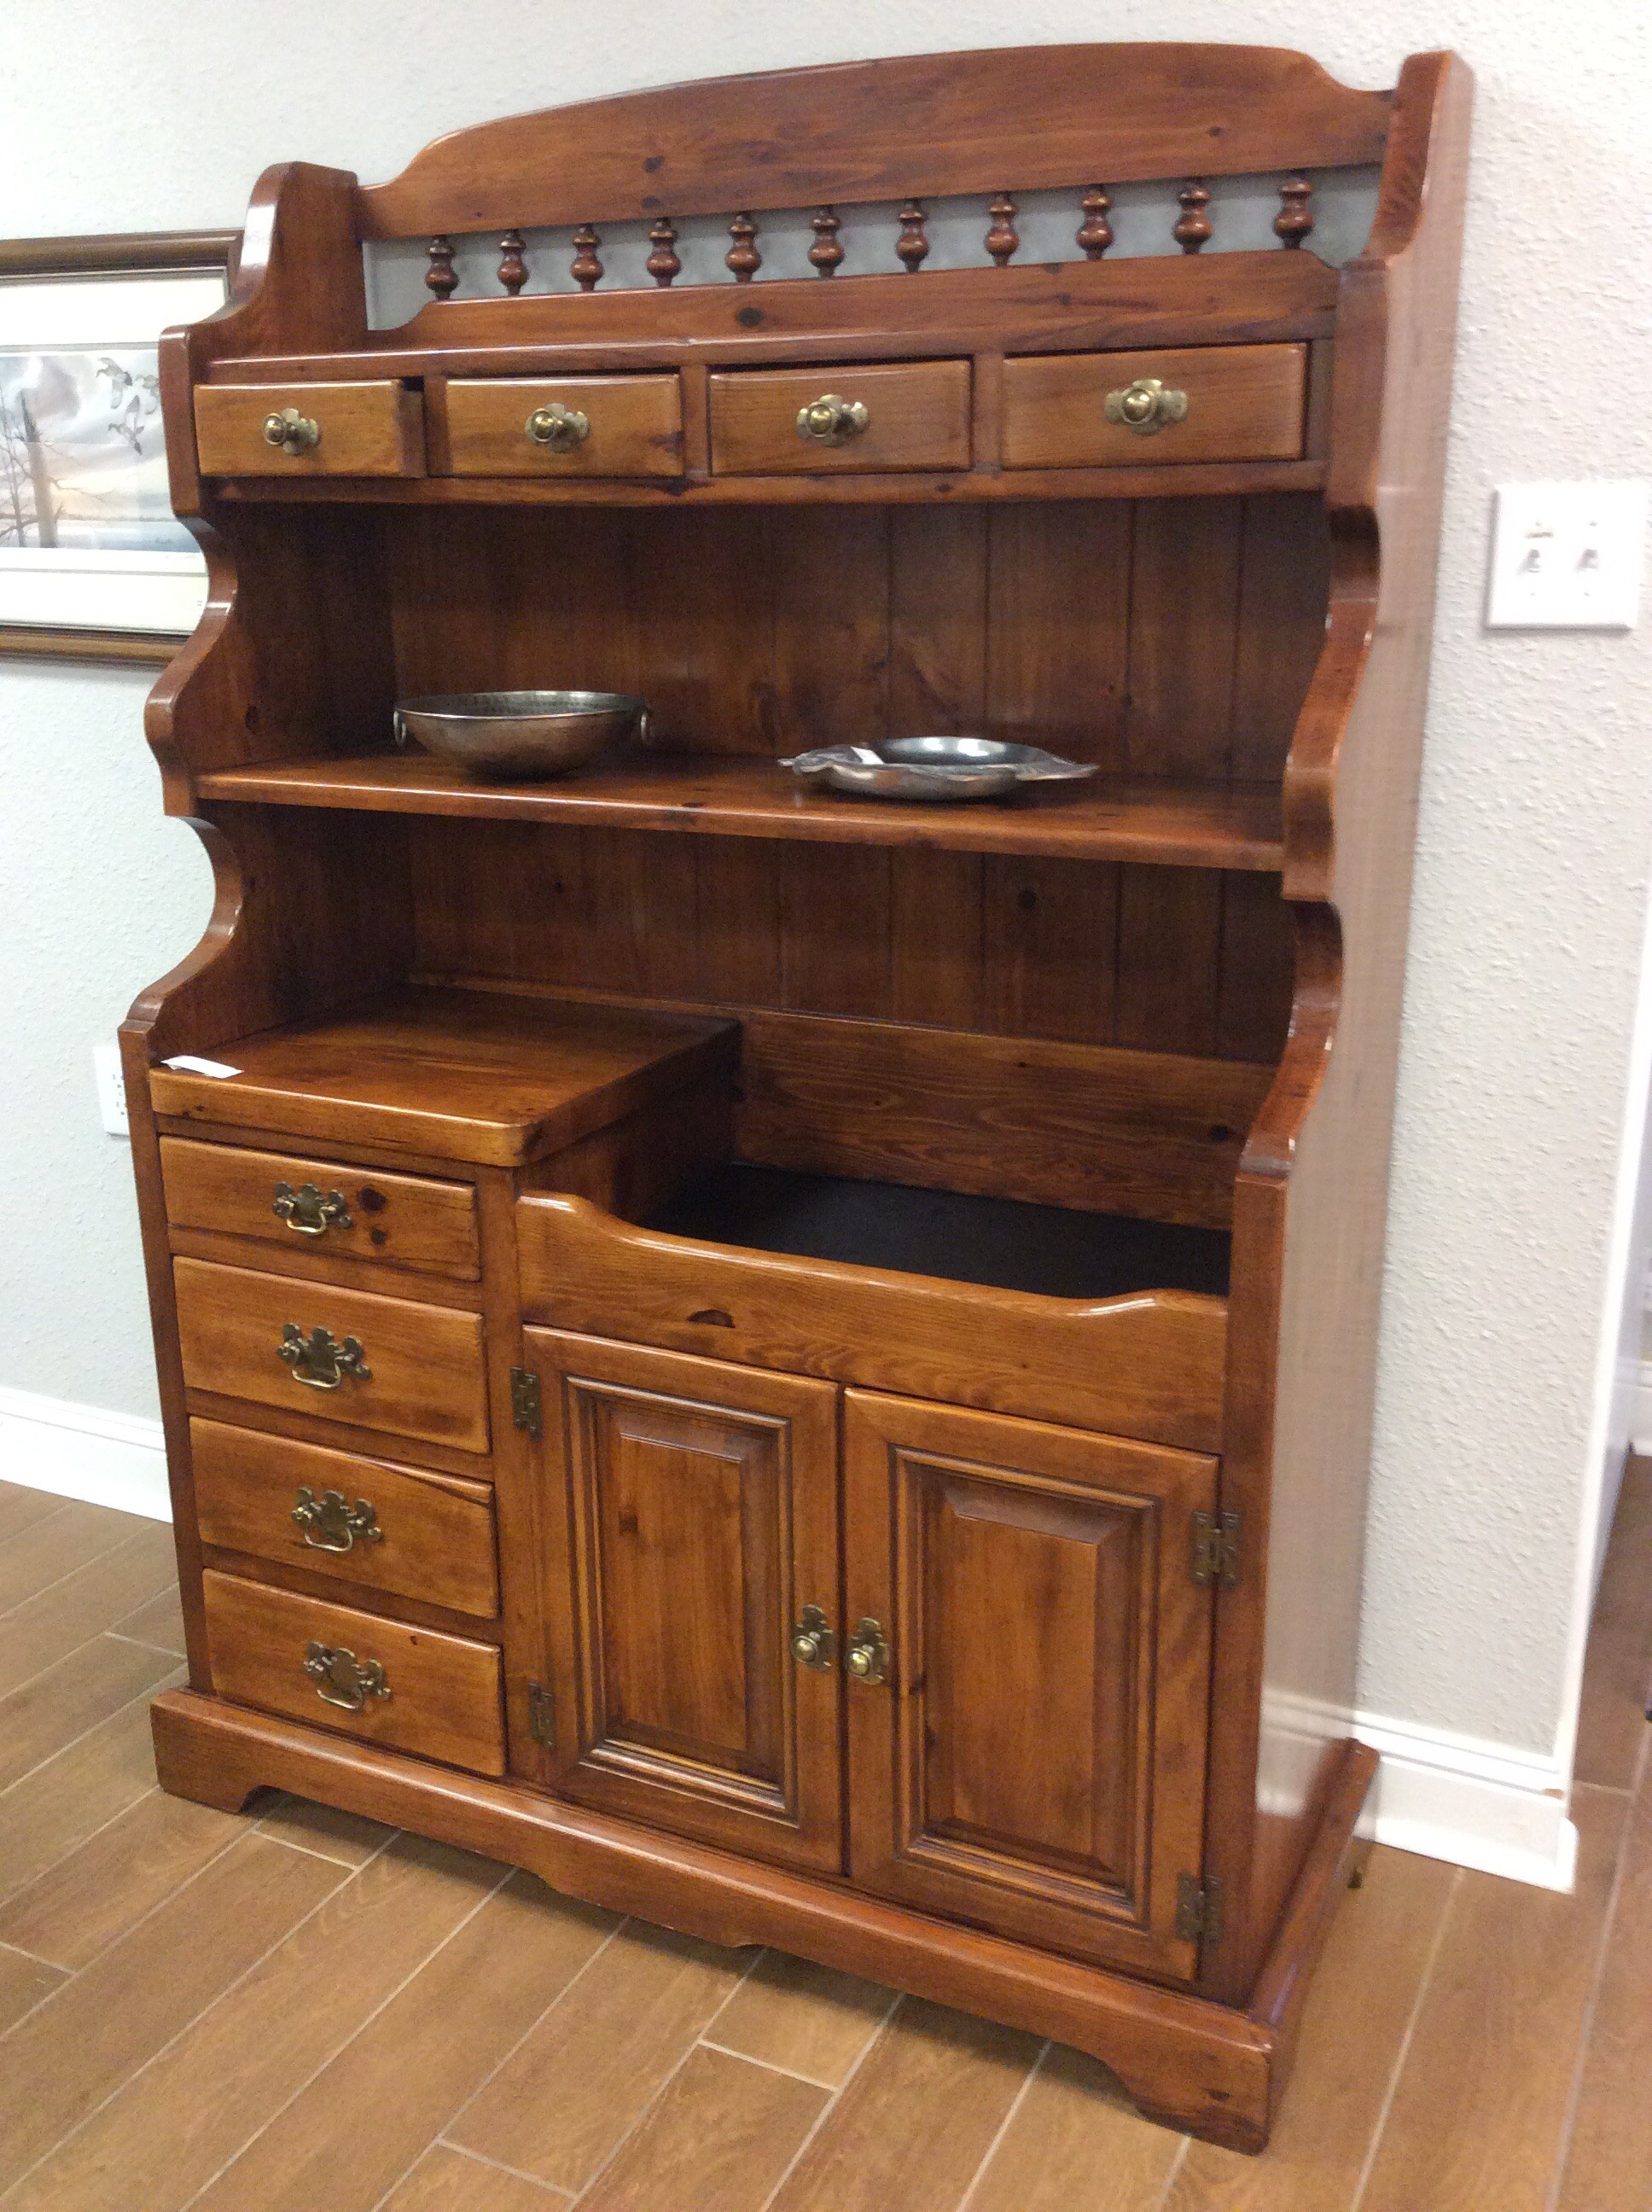 You don't see these very often now days!
This dry sink has plenty of storage. It has four drawers and a shelf on the top. In the middle it has a dry bar and a shelf. The bottom has four drawers and two doors for storage.
Measures 48x19x69